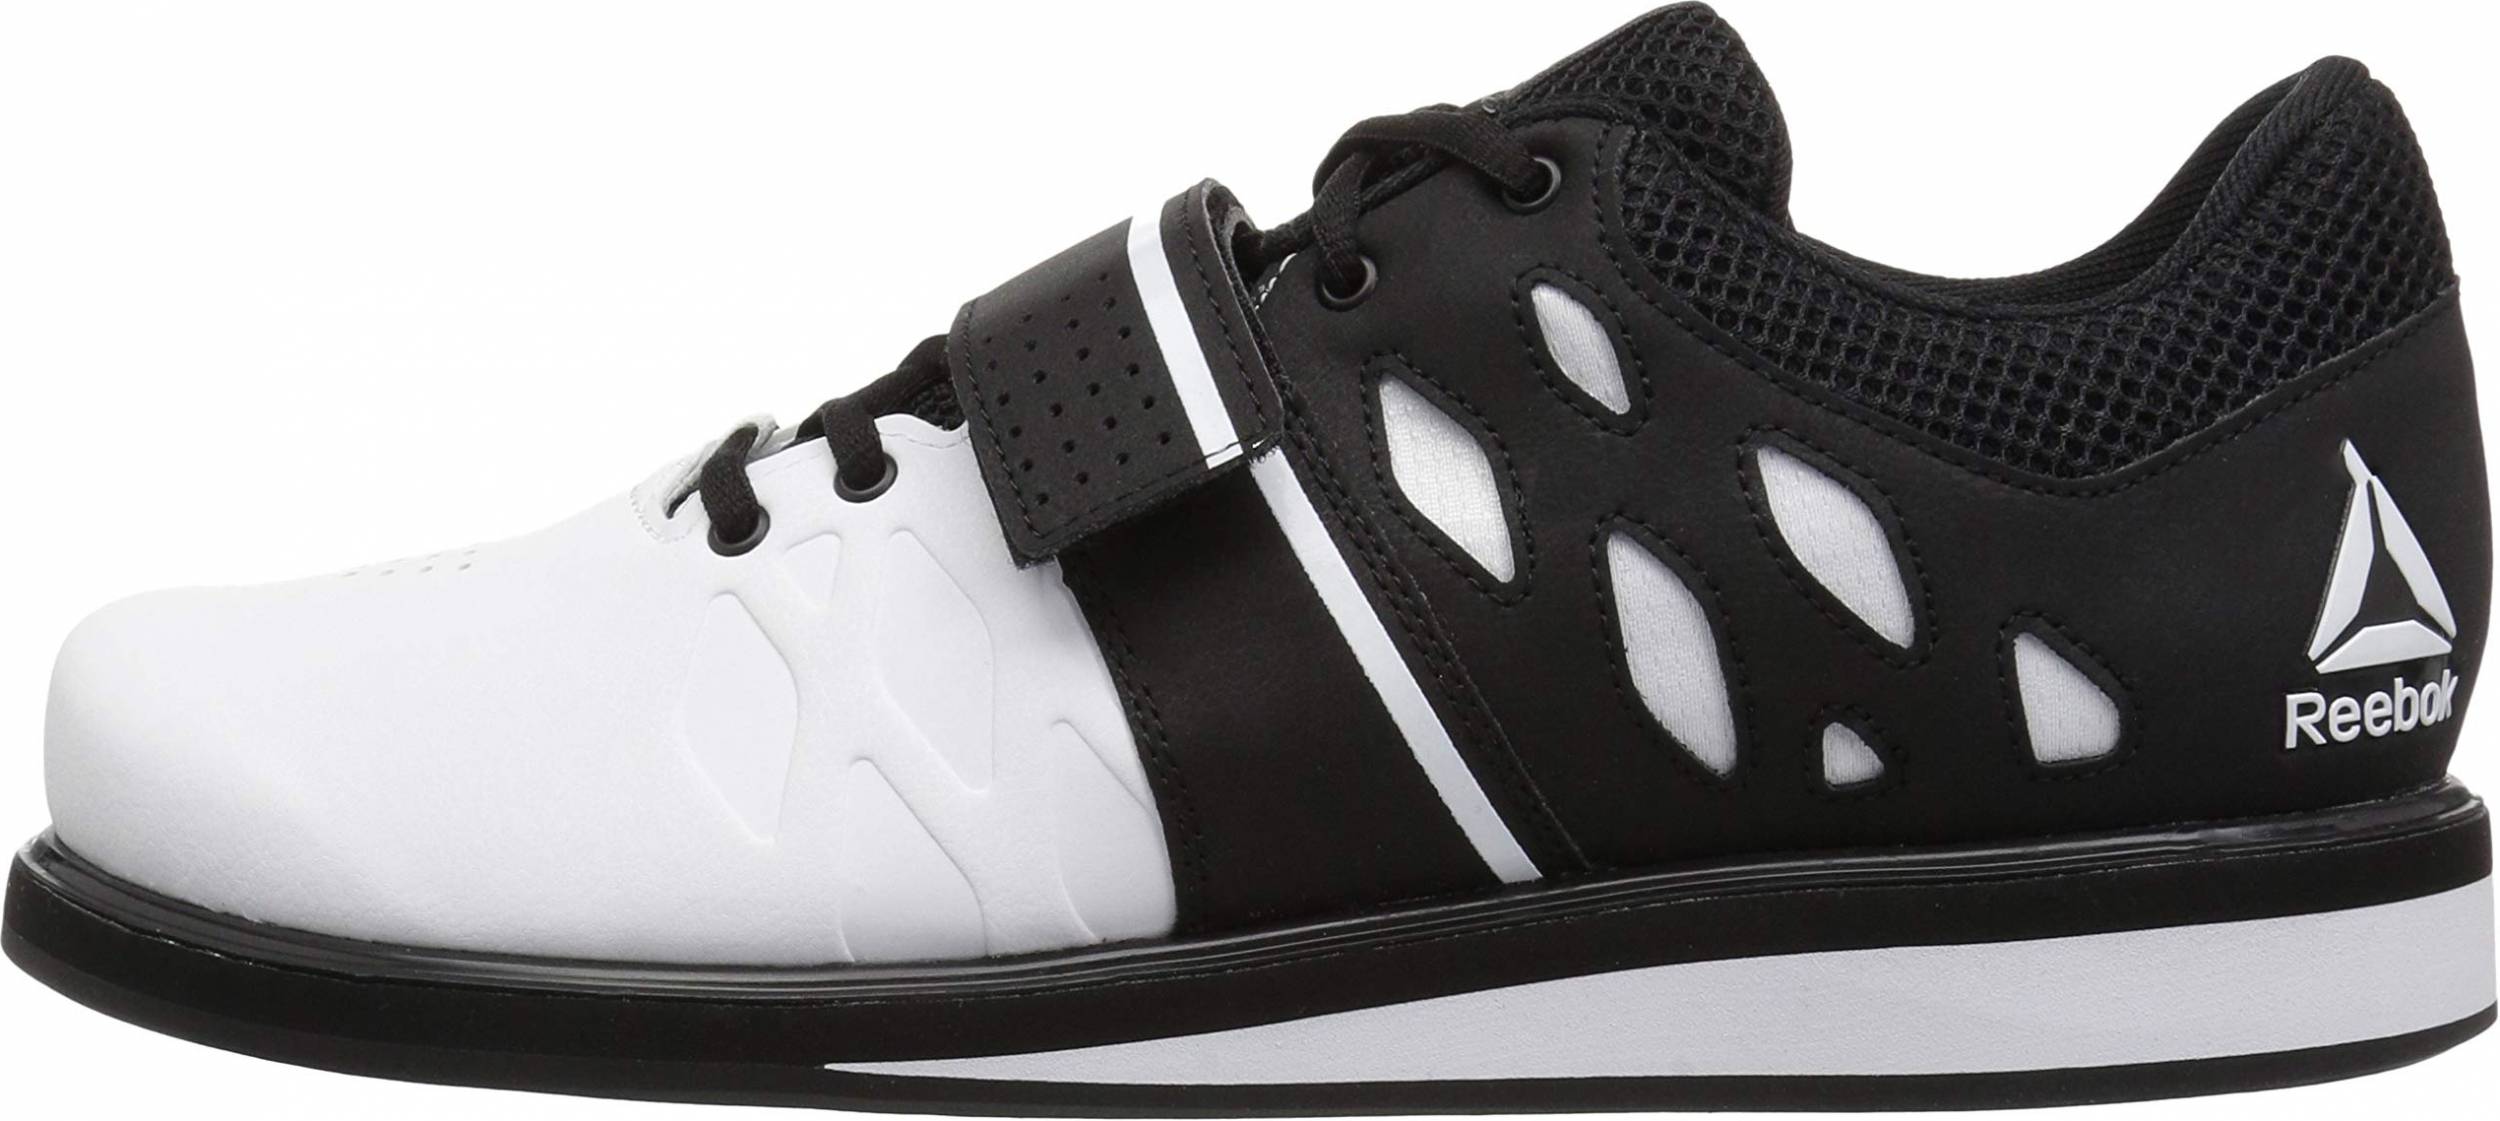 Save 42% on Reebok Weightlifting Shoes 